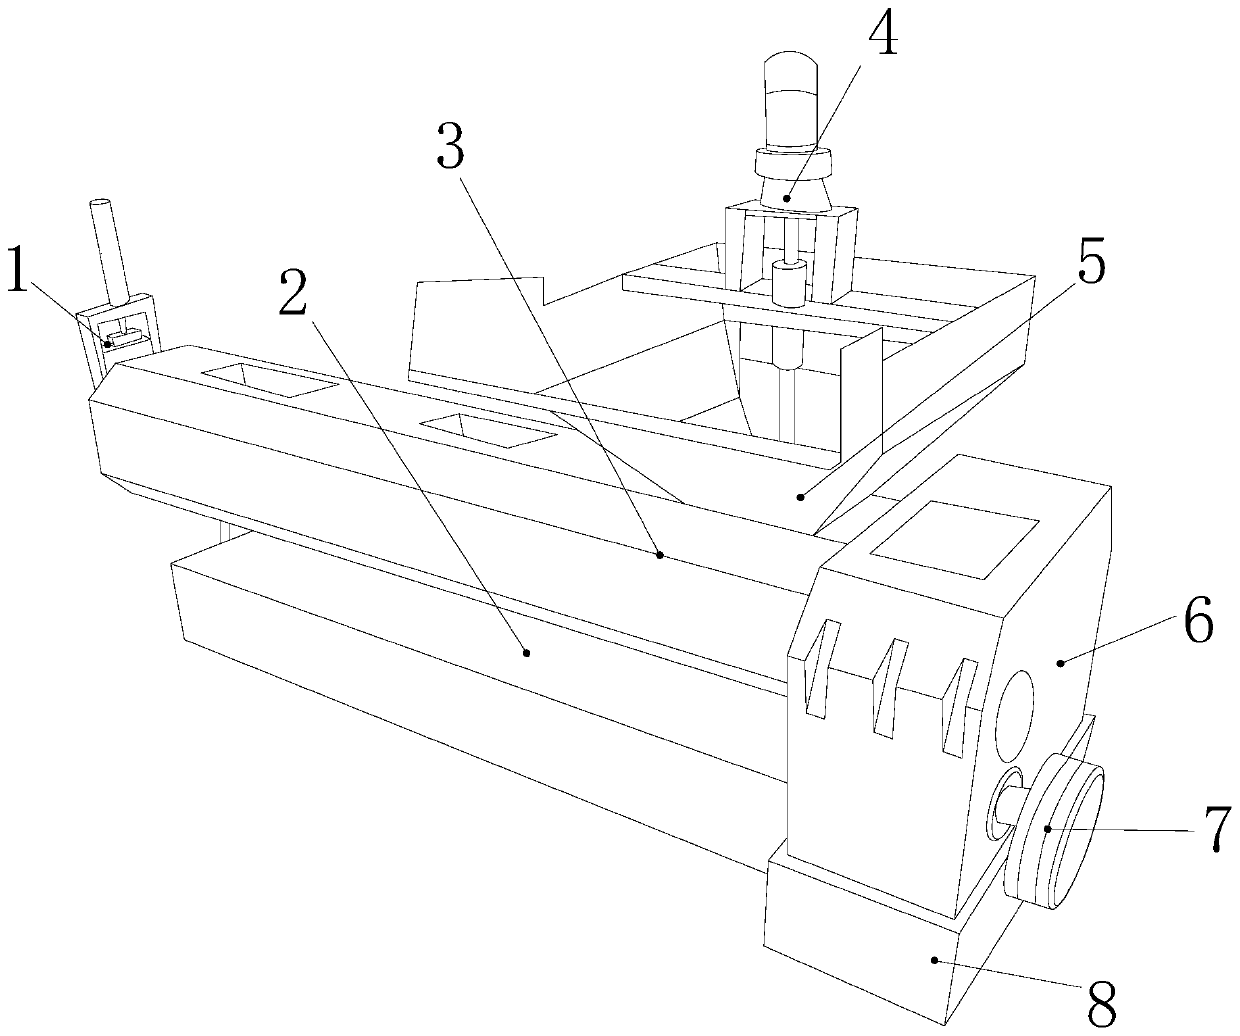 Plastic particle extruding production equipment for carrying out polyvinyl chloride smoke dechlorinating through S-shaped screw rod